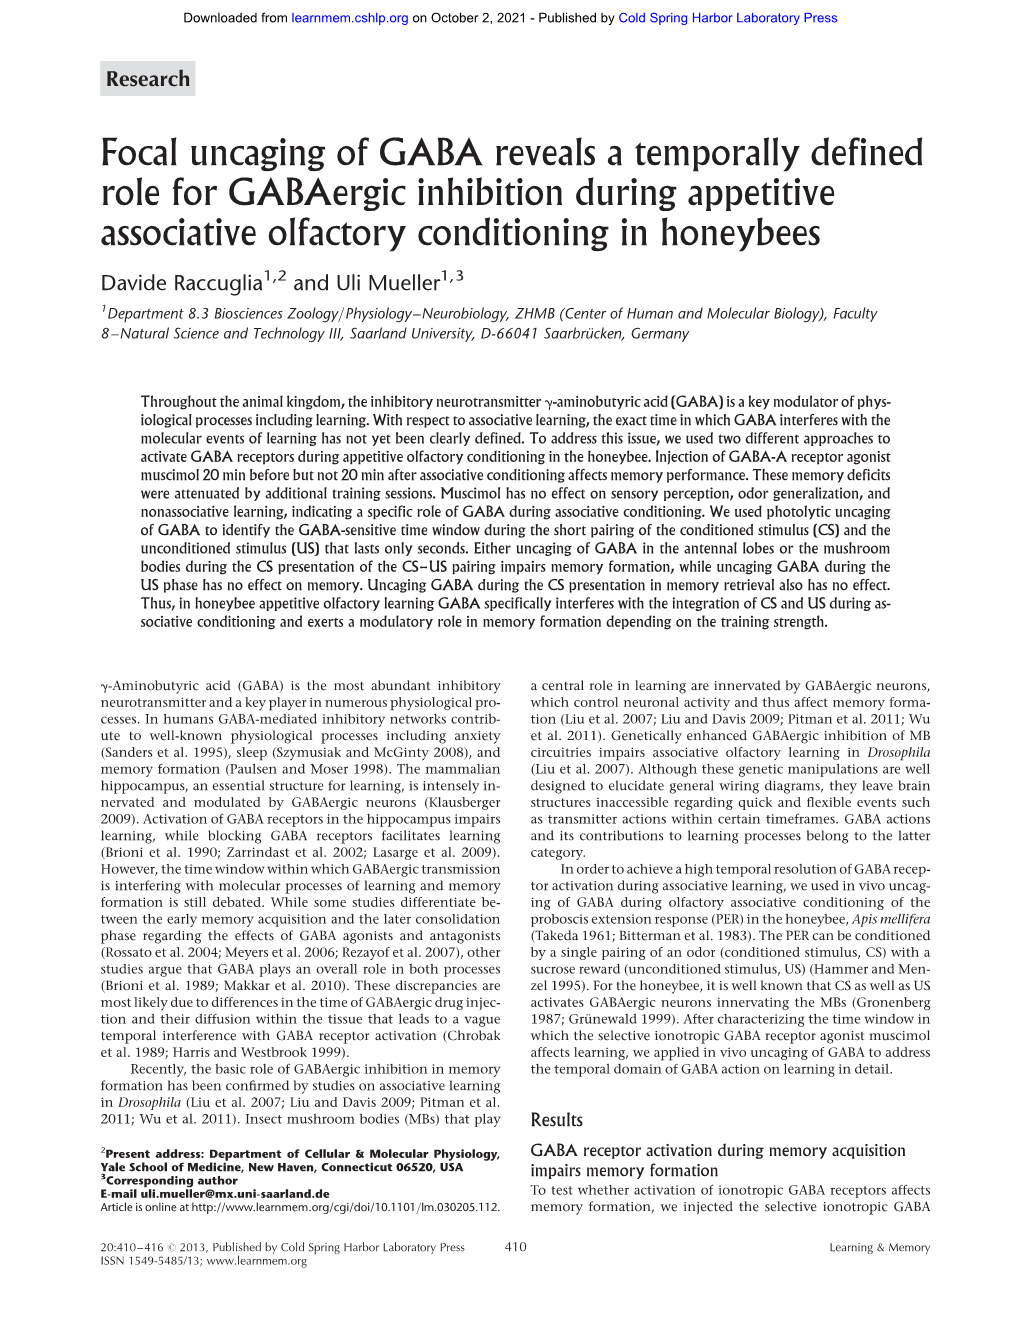 Focal Uncaging of GABA Reveals a Temporally Defined Role for Gabaergic Inhibition During Appetitive Associative Olfactory Conditioning in Honeybees